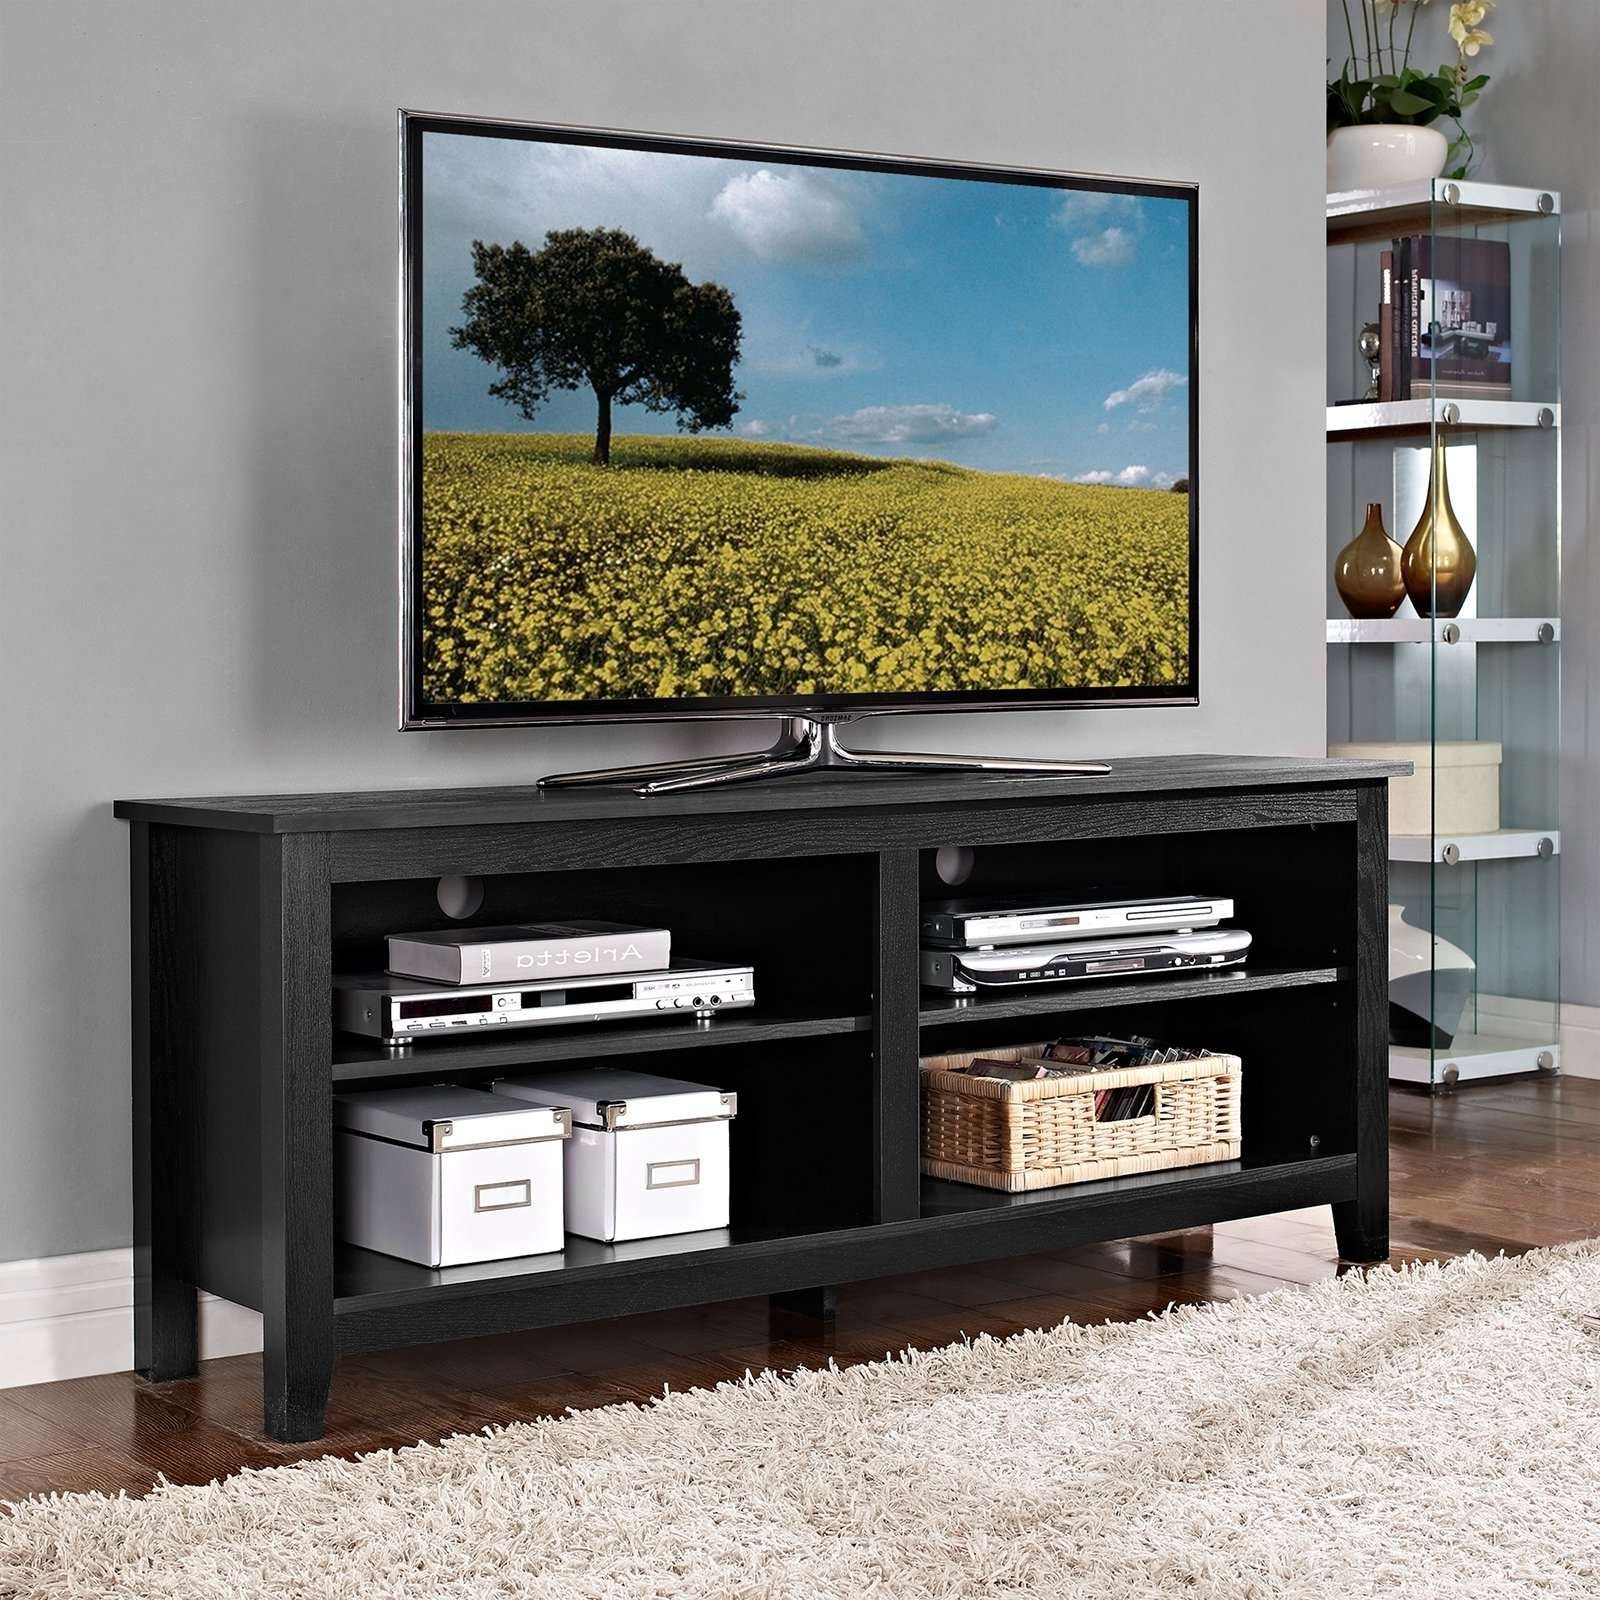 Walker Edison 58 In. Wood Tv Stand – Black | Hayneedle Within Wooden Tv Stands (Gallery 9 of 15)